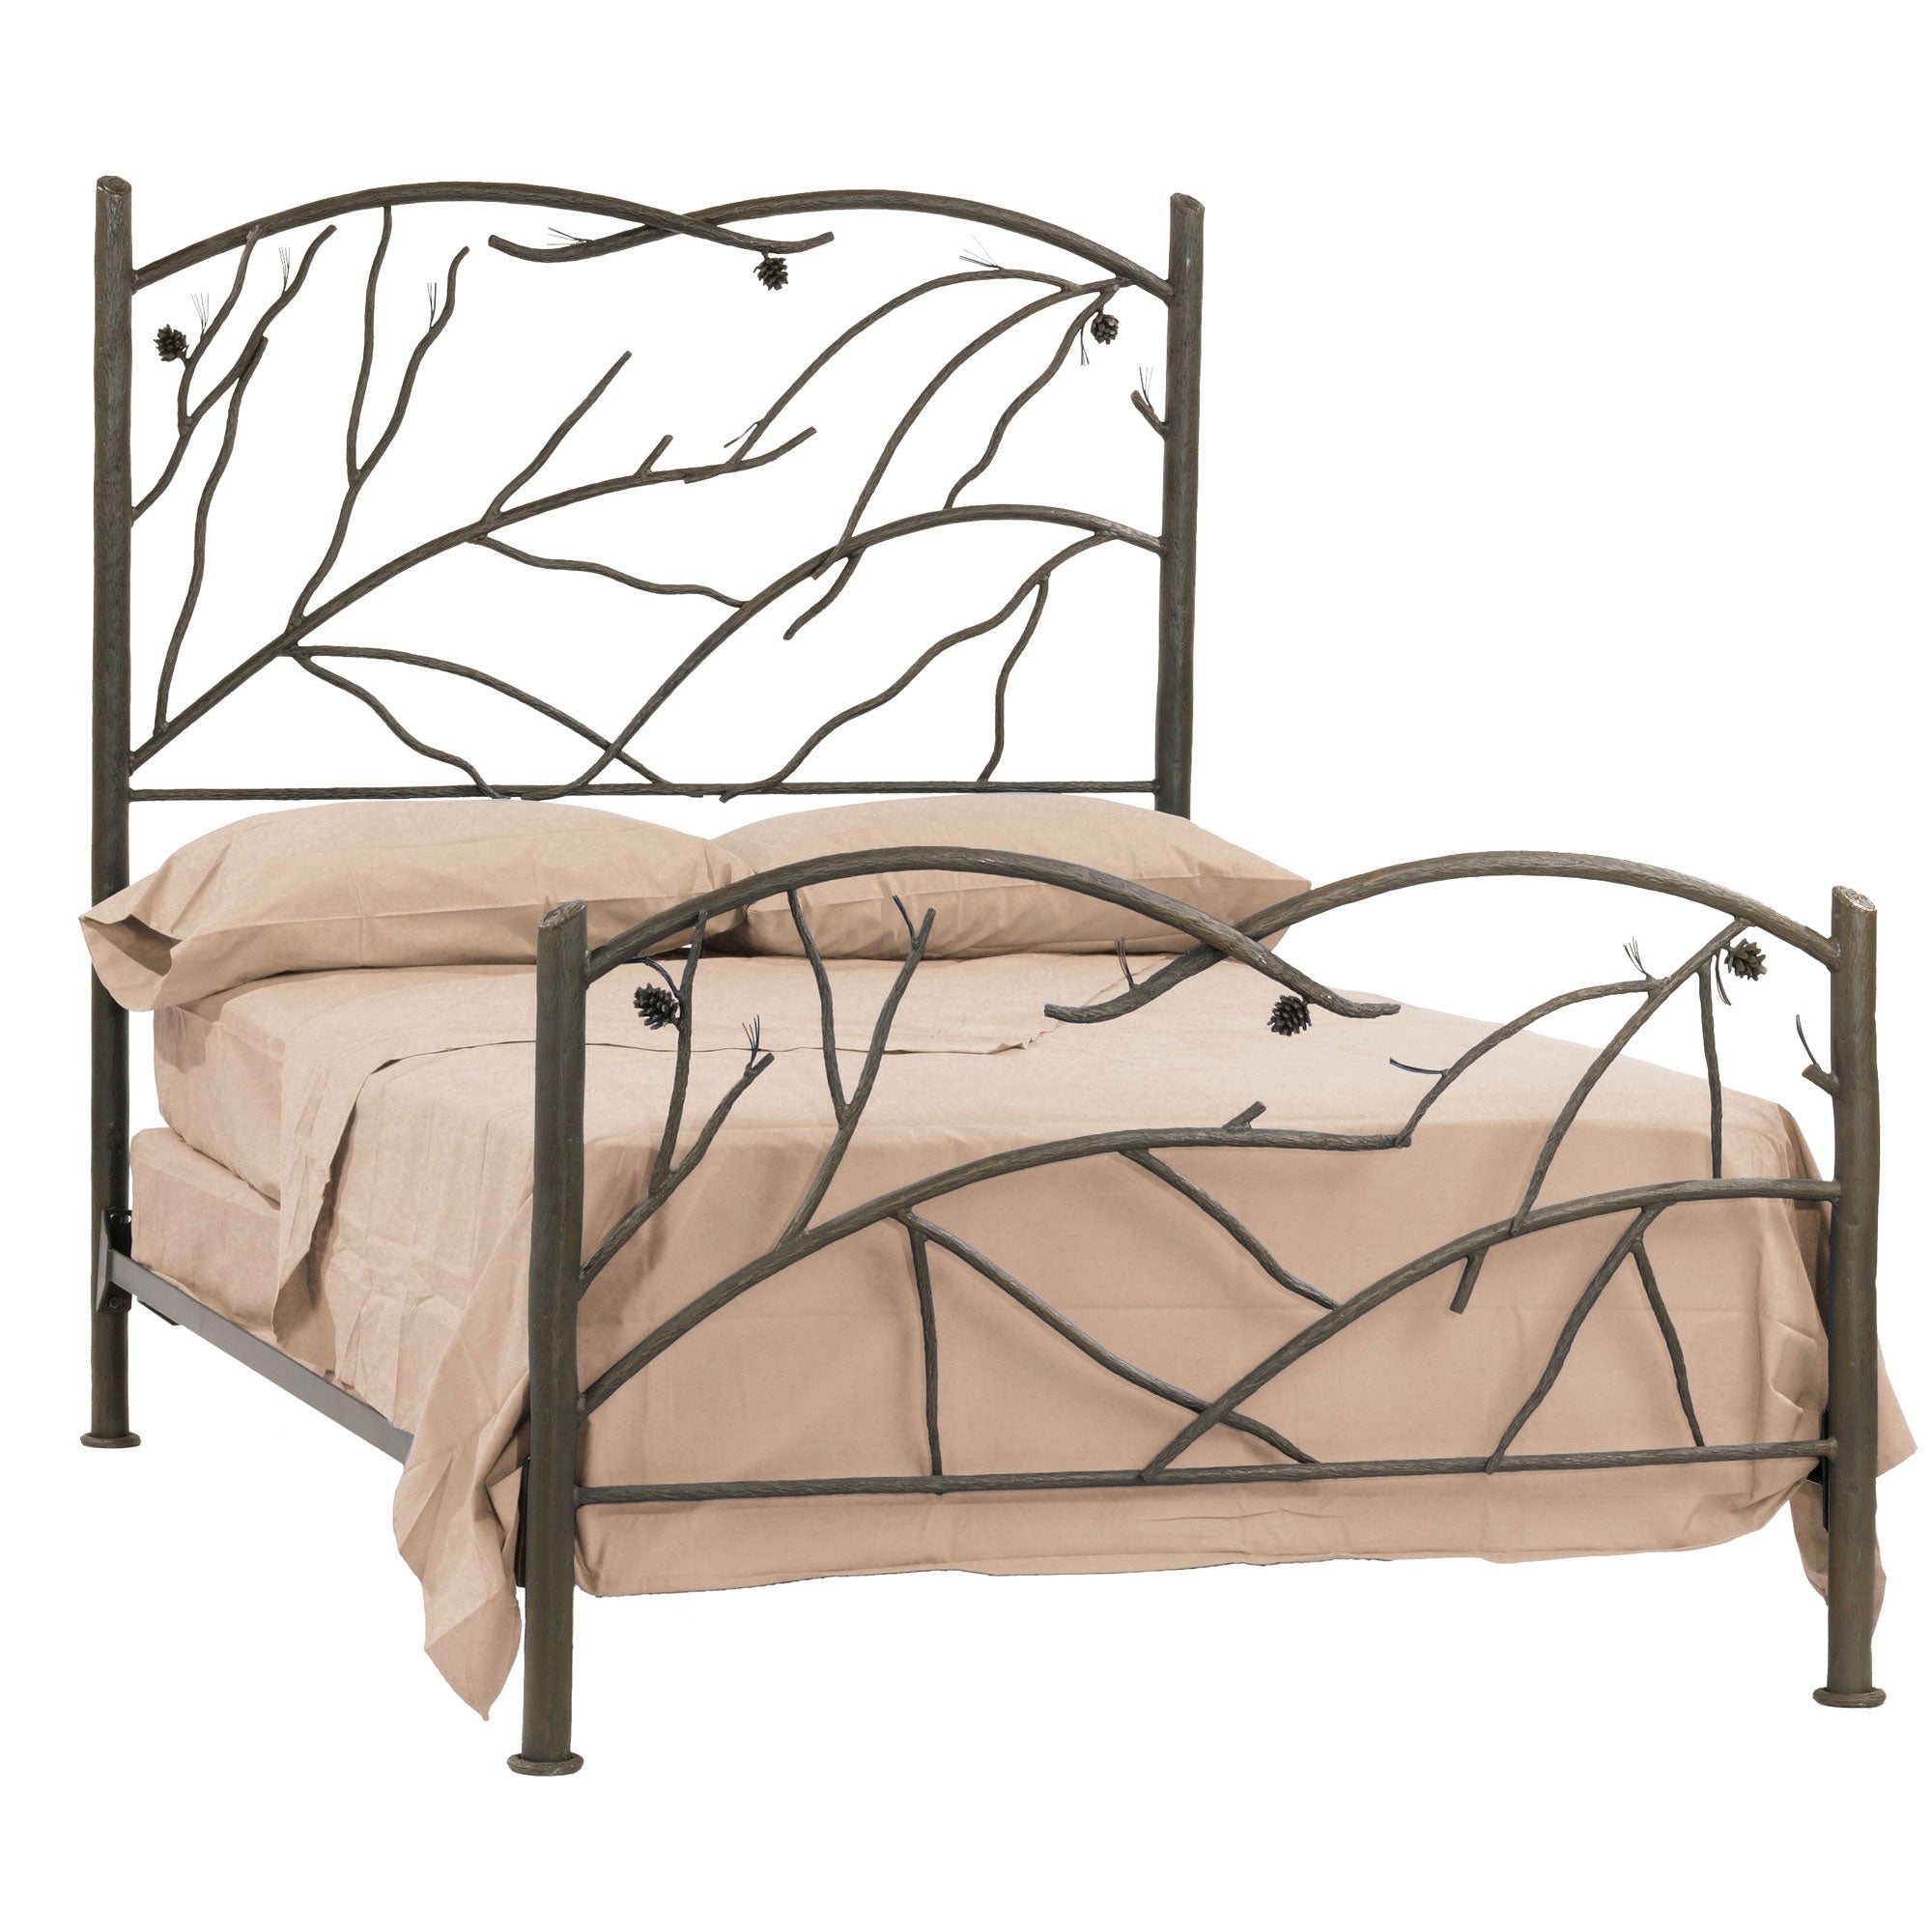 Wrought Iron Bed Rustic Pine Textured, Rod Iron Queen Bed